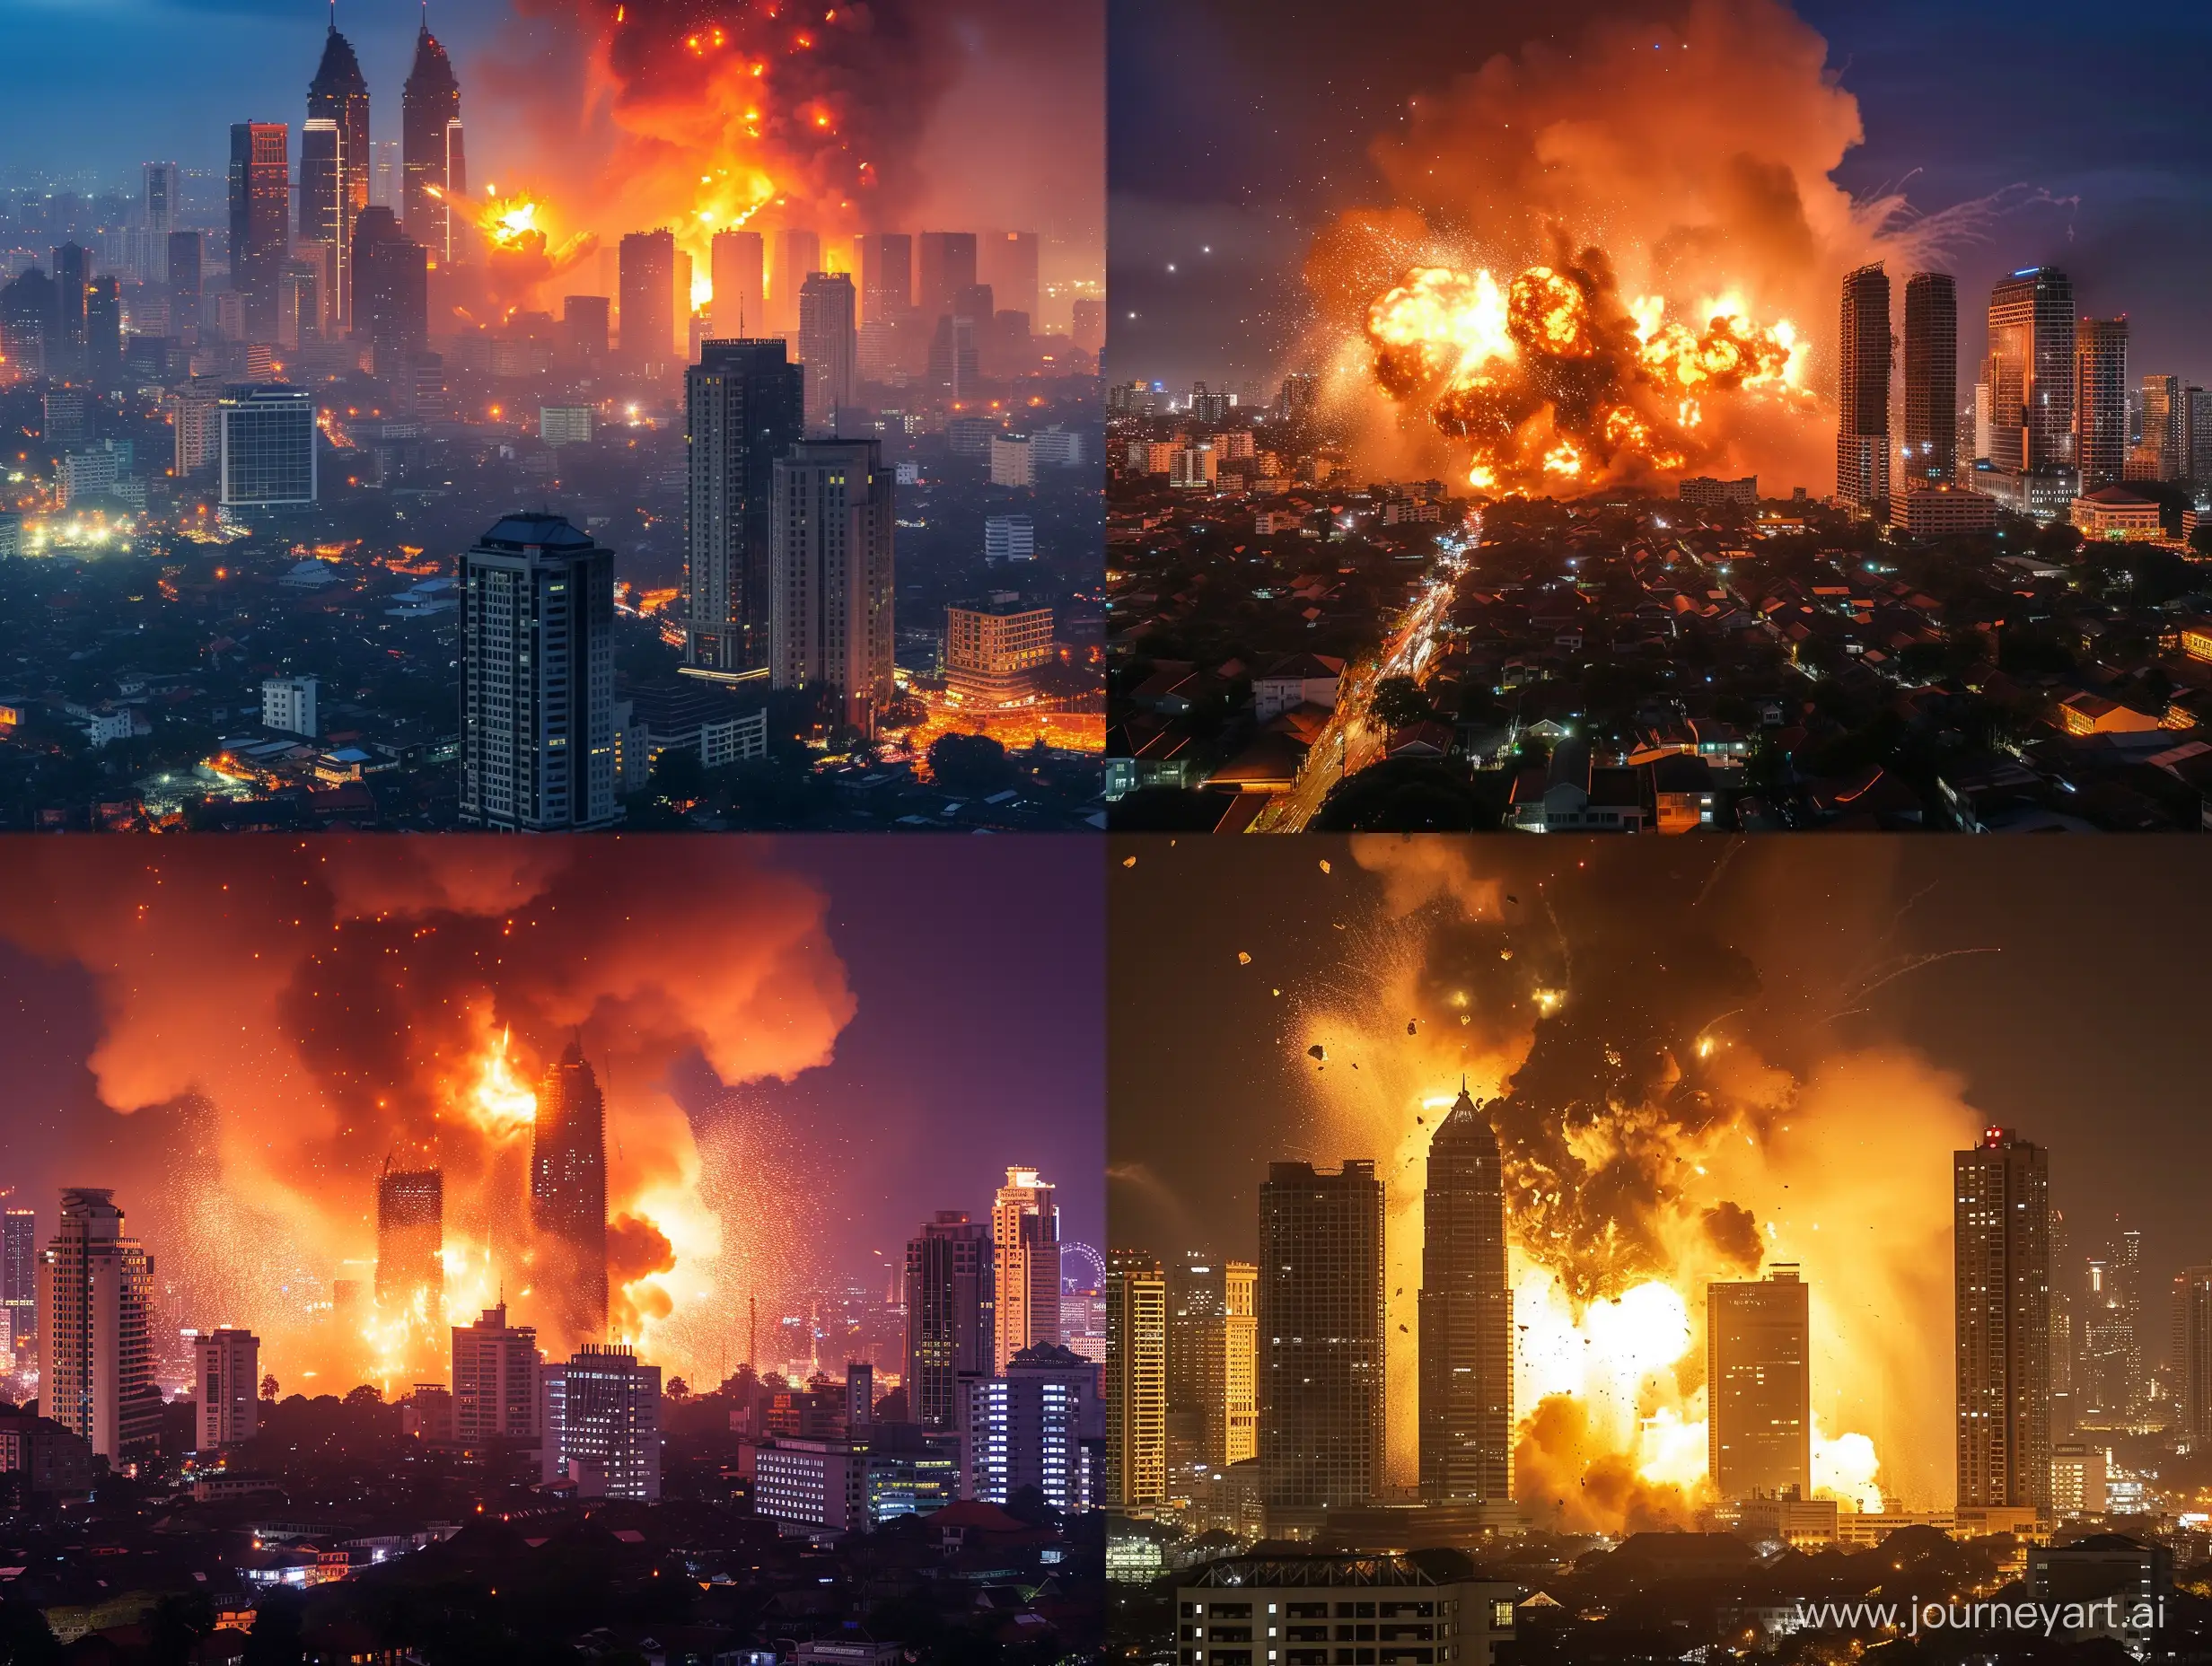 Explosion of the Jakarta in Indonesia at night